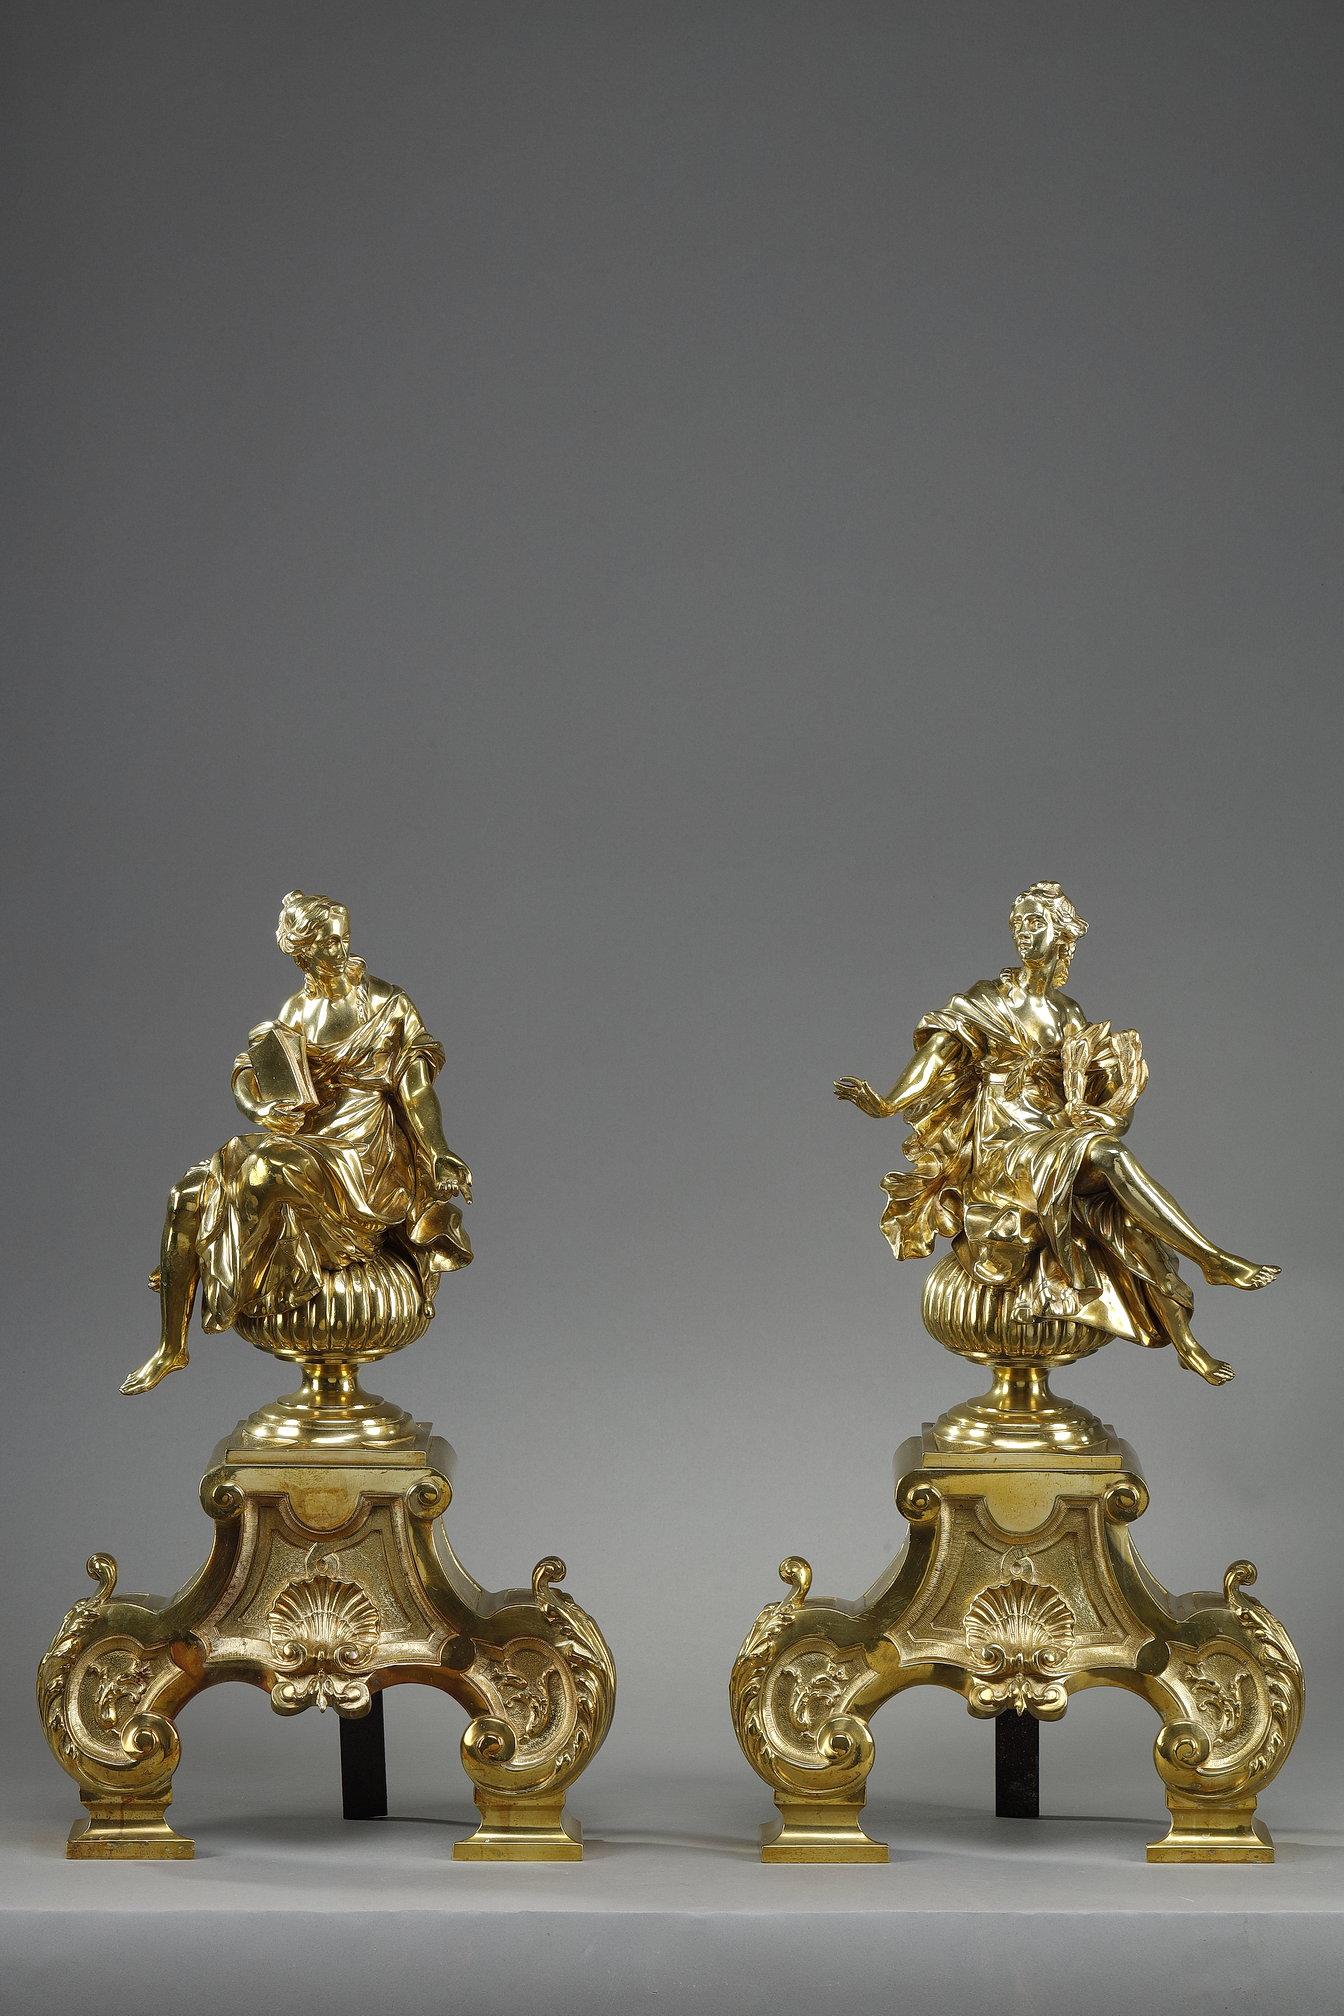 Pair of Louis XIV style ormolu and chased mantel lights decorated with muses seated on gadrooned balls, the base scrolled and foliated. The muses are draped and appear to be conversing opposite each other. One is carrying a book, the other a laurel